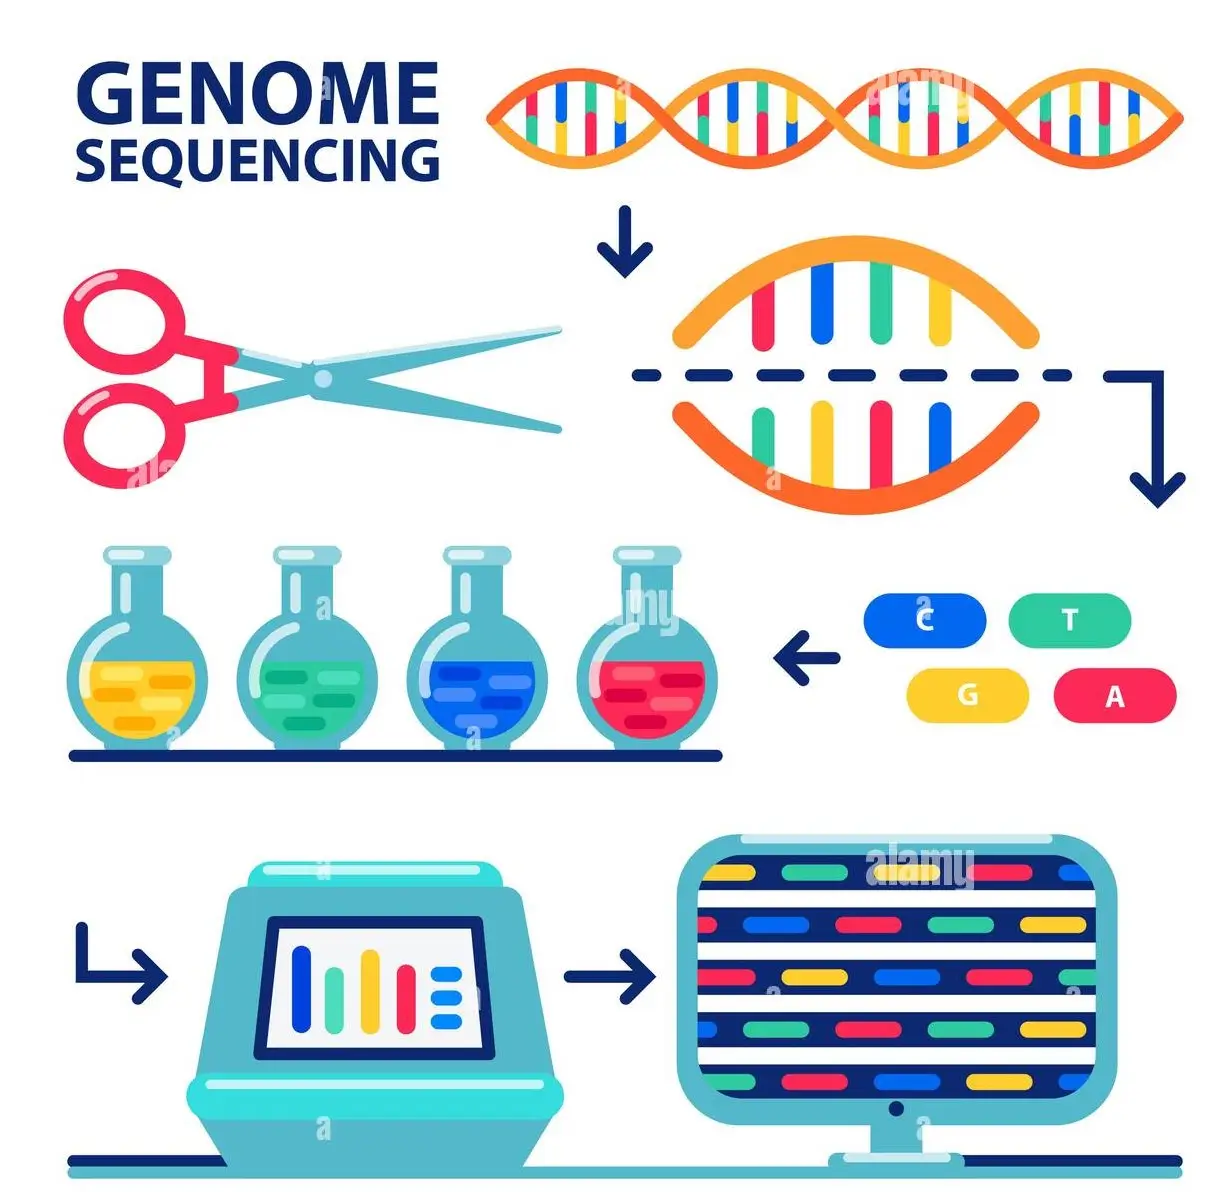 Human genome sequencing